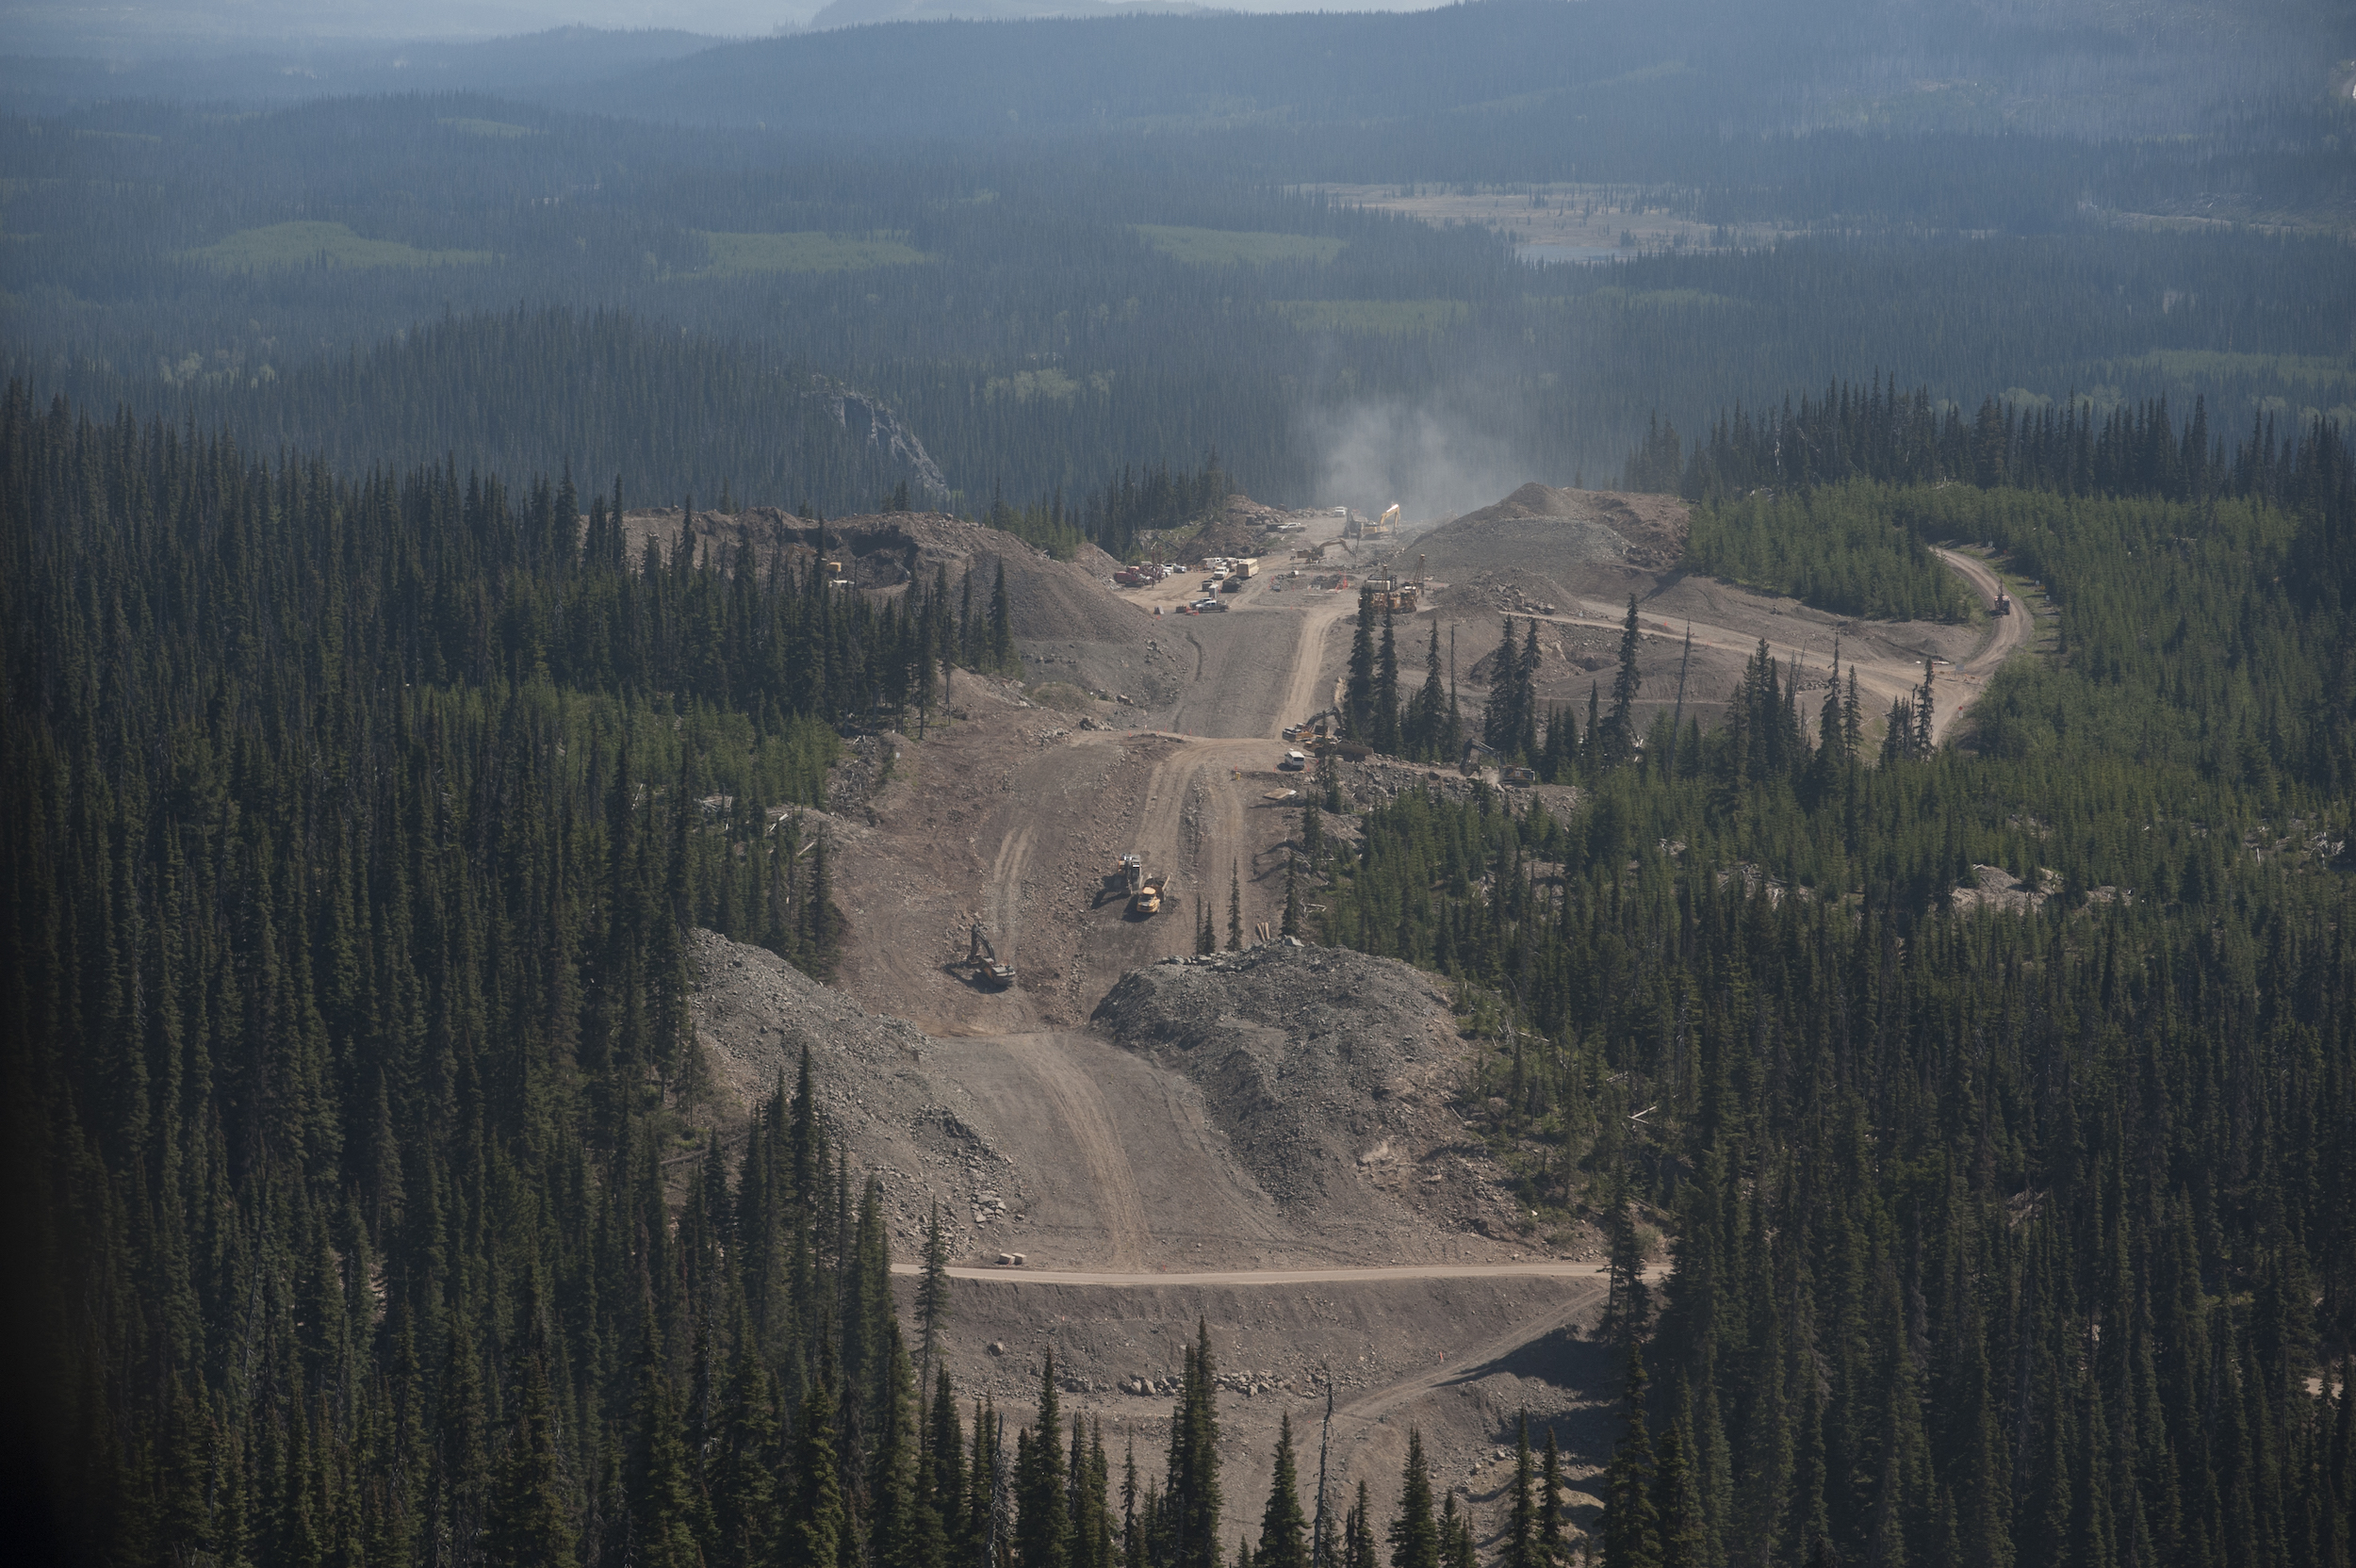 Dust rises from a section of the Coastal GasLink pipeline right of way on Wet'suwet'en territory